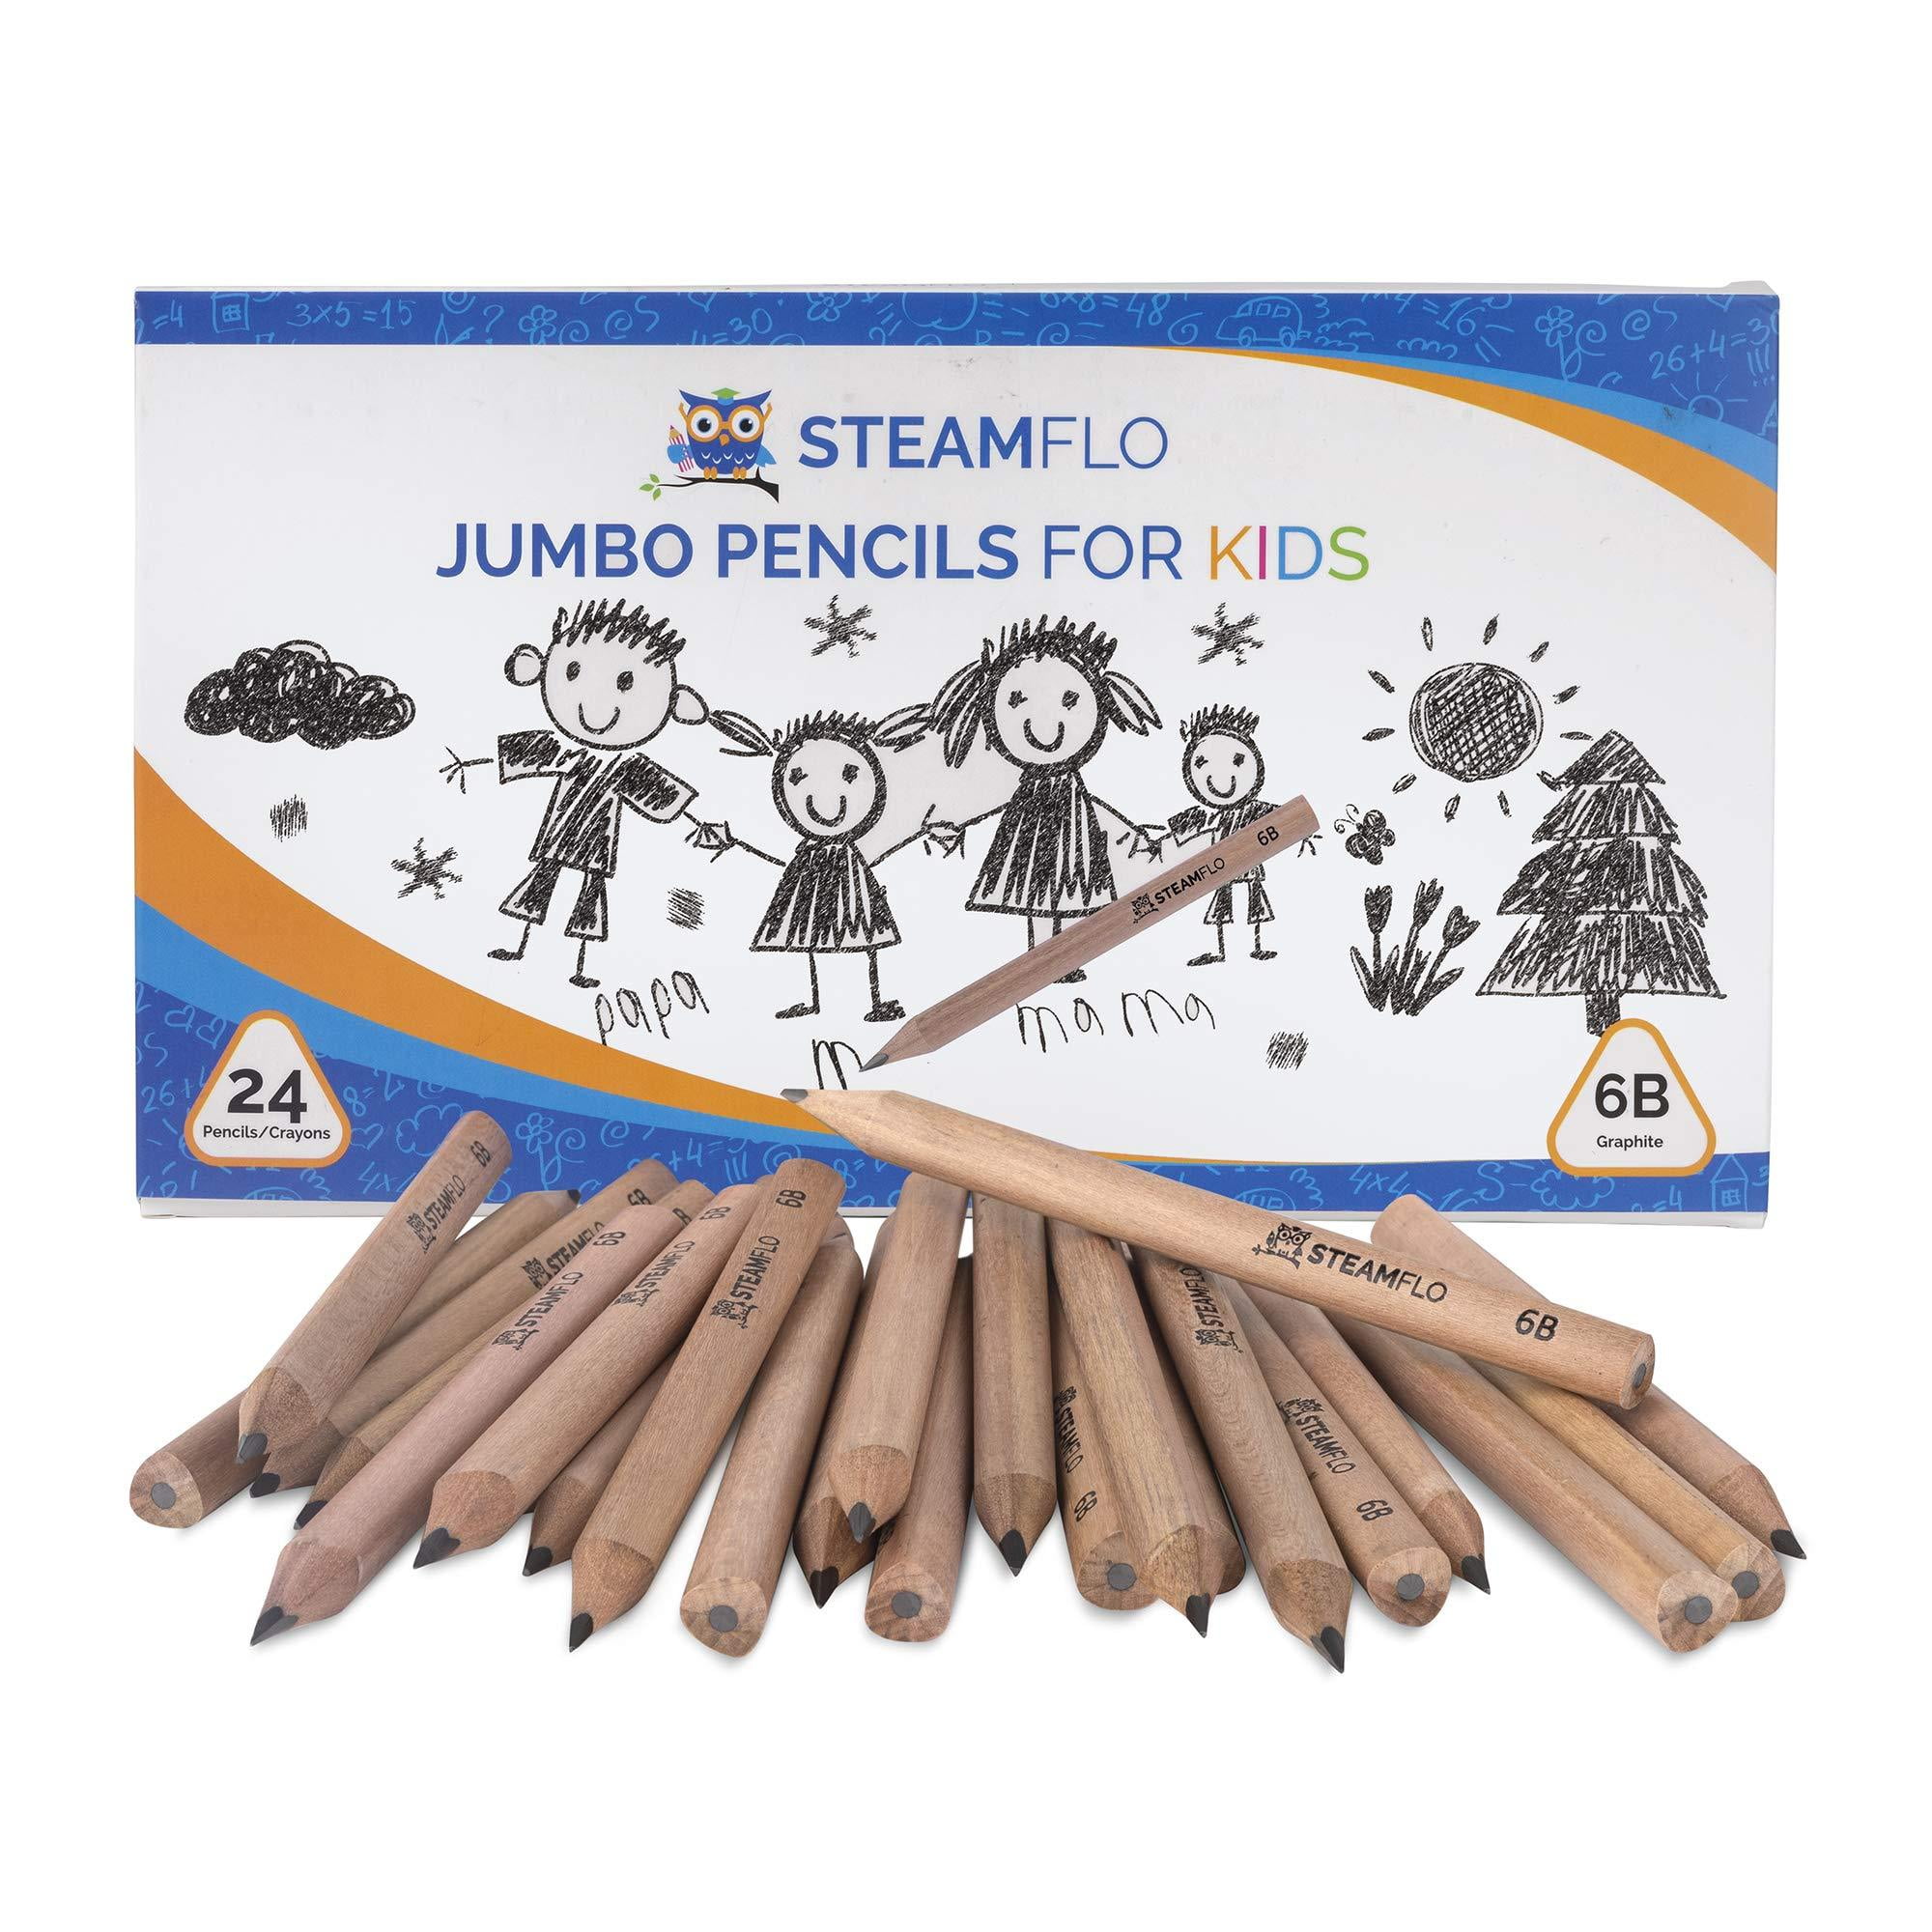 steamflo PNCL8S STEAMFLO Learning Pencils for Toddlers 2-4 Years - Our Kids  Pencils for Beginners Toddlers and Preschoolers with Jumbo Triangle